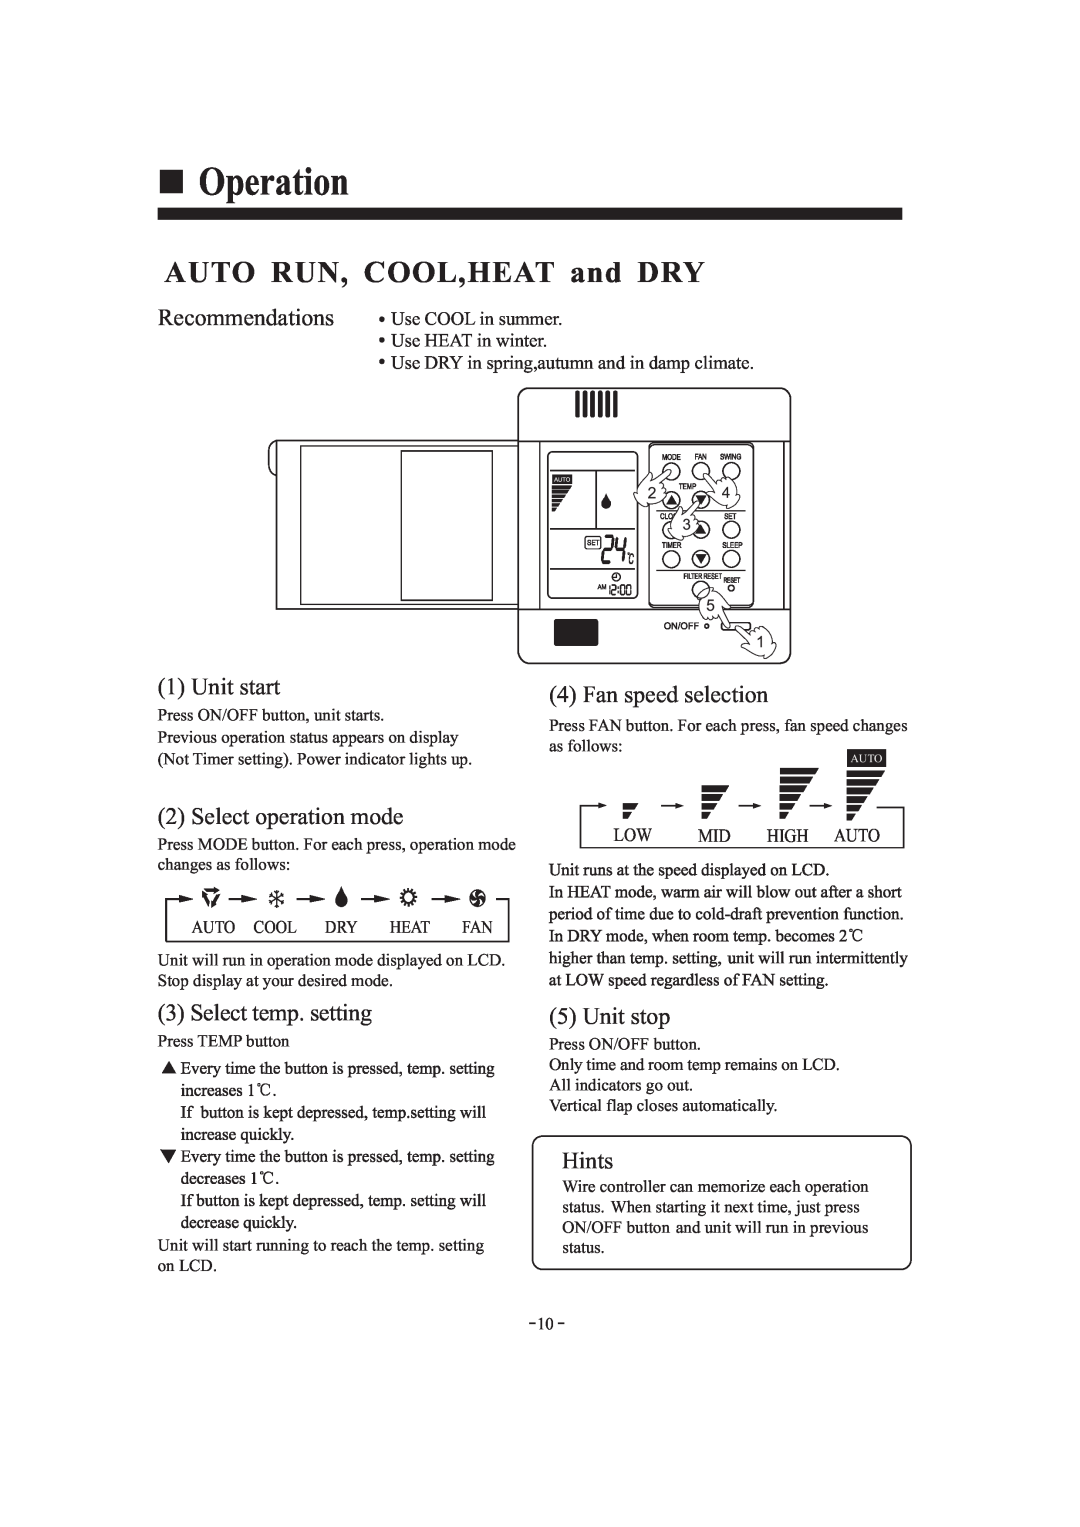 Haier HDU-42HF03/H AUTO RUN, COOL,HEAT and DRY, Recommendations, Fan speed selection, Select temp. setting, Unit stop 